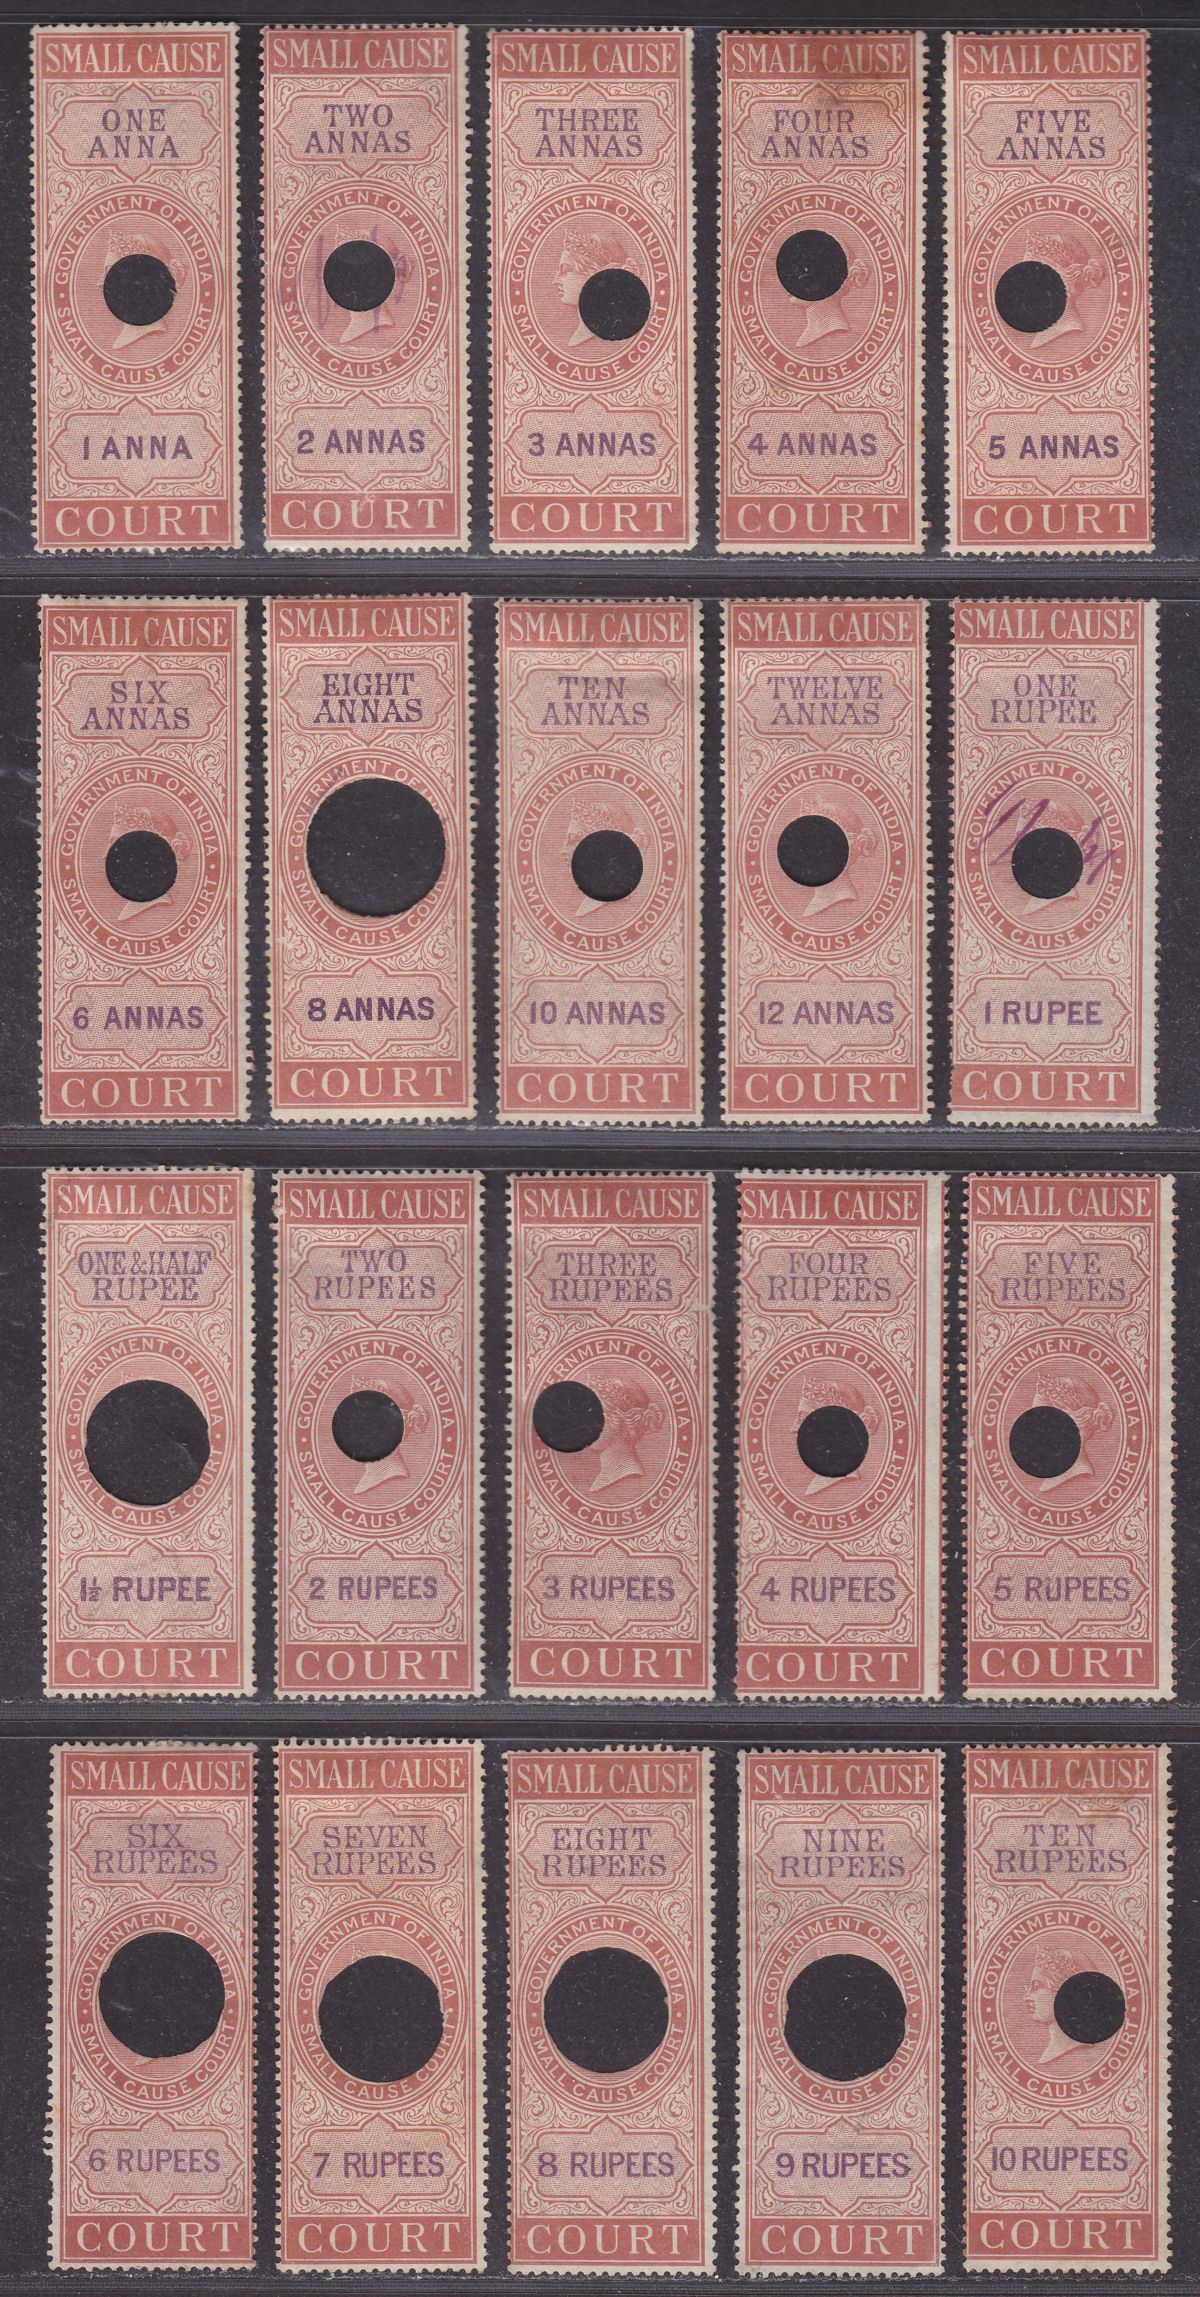 India 1868 QV Revenue Small Cause Court 1a to 10r Orange and Violet Used BF1-20